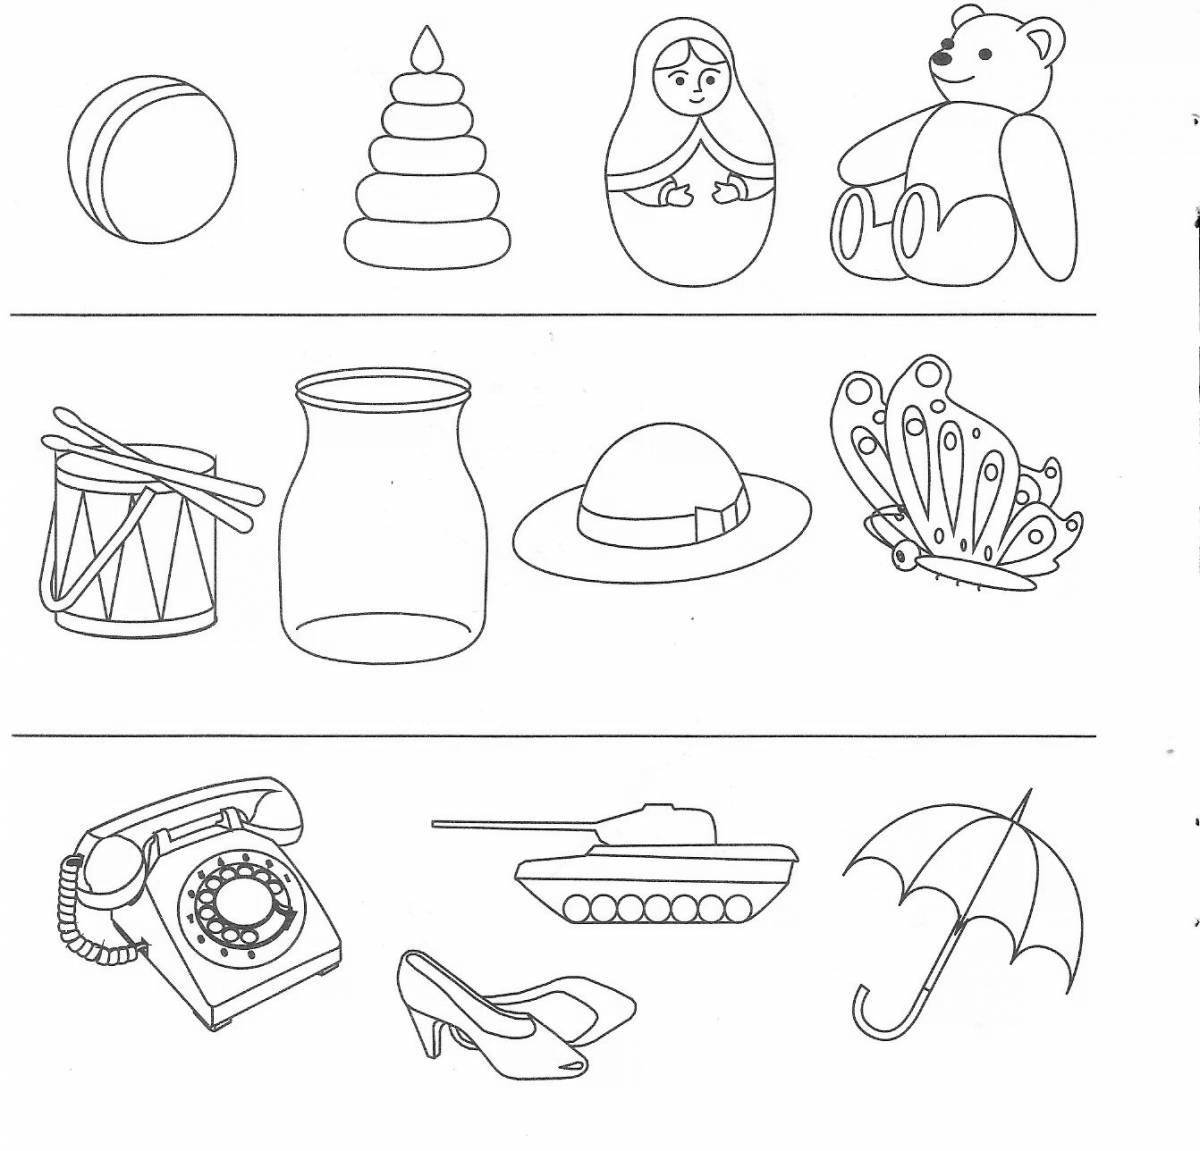 Colorful-adorable coloring pages for kids